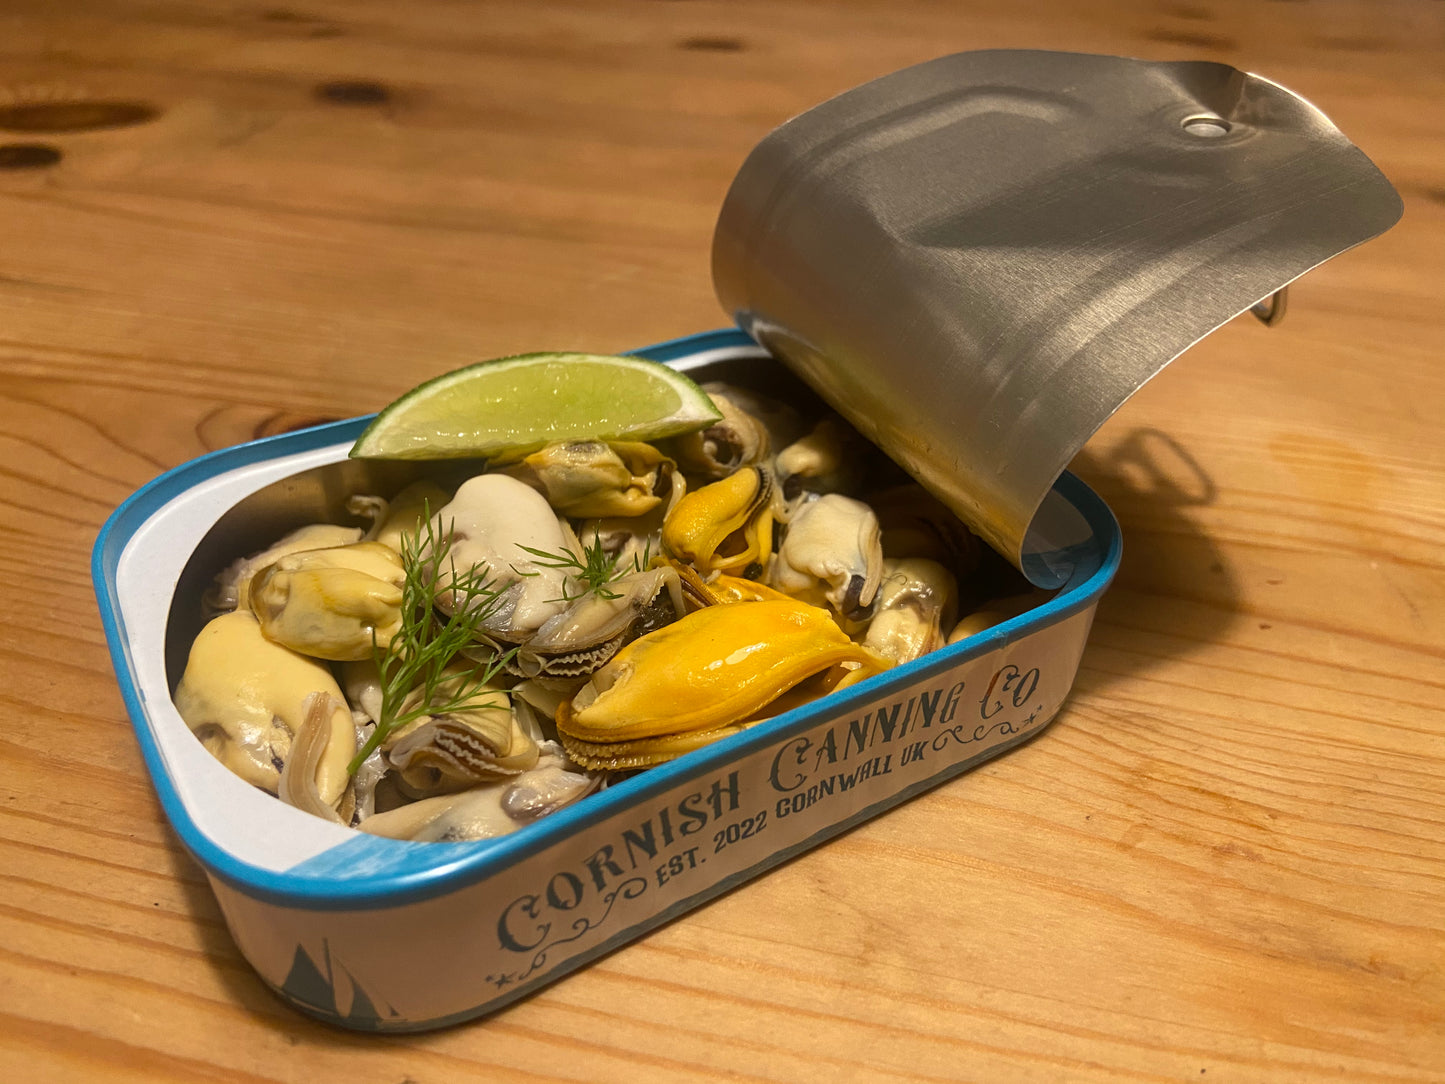 Cornish Mussels - 'Rope Grown'